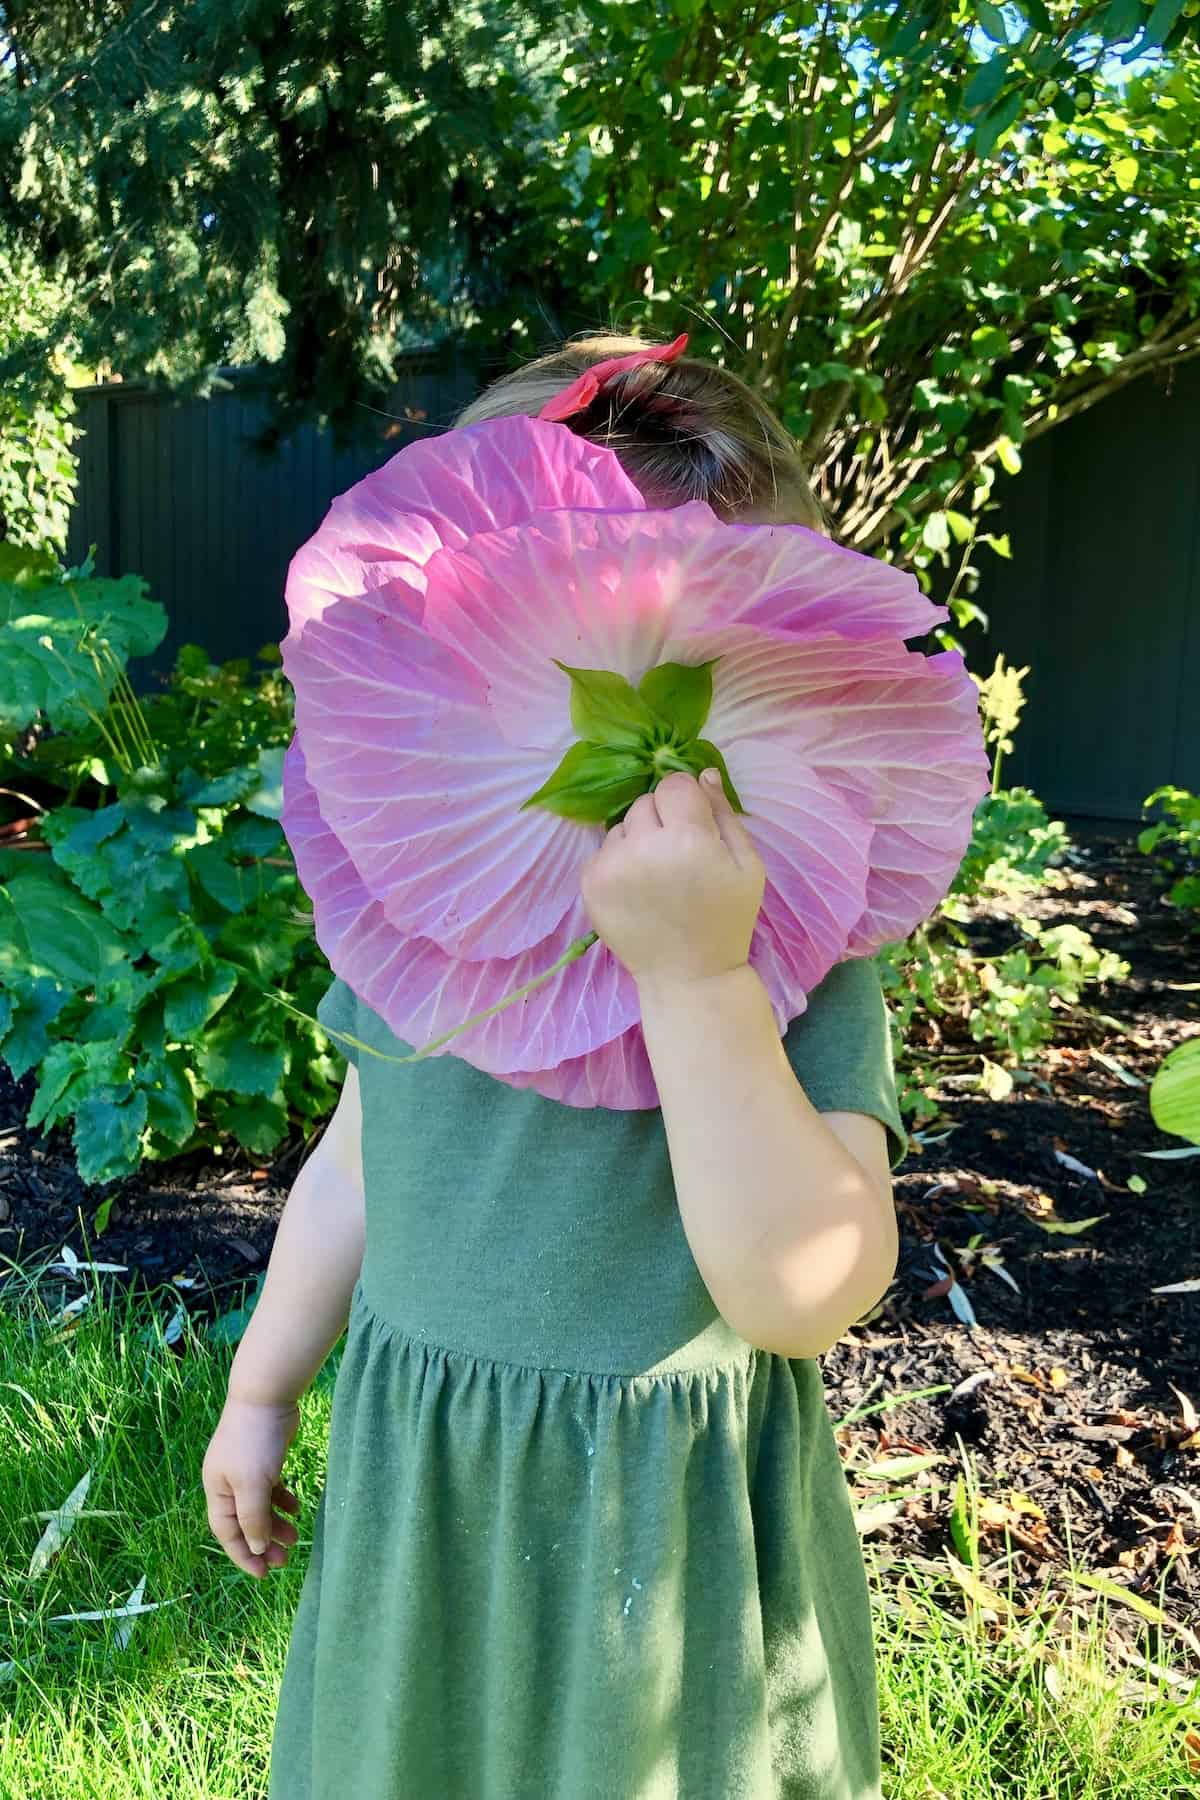 Child holding pink dinner plate hibiscus flower up to smell scent in garden